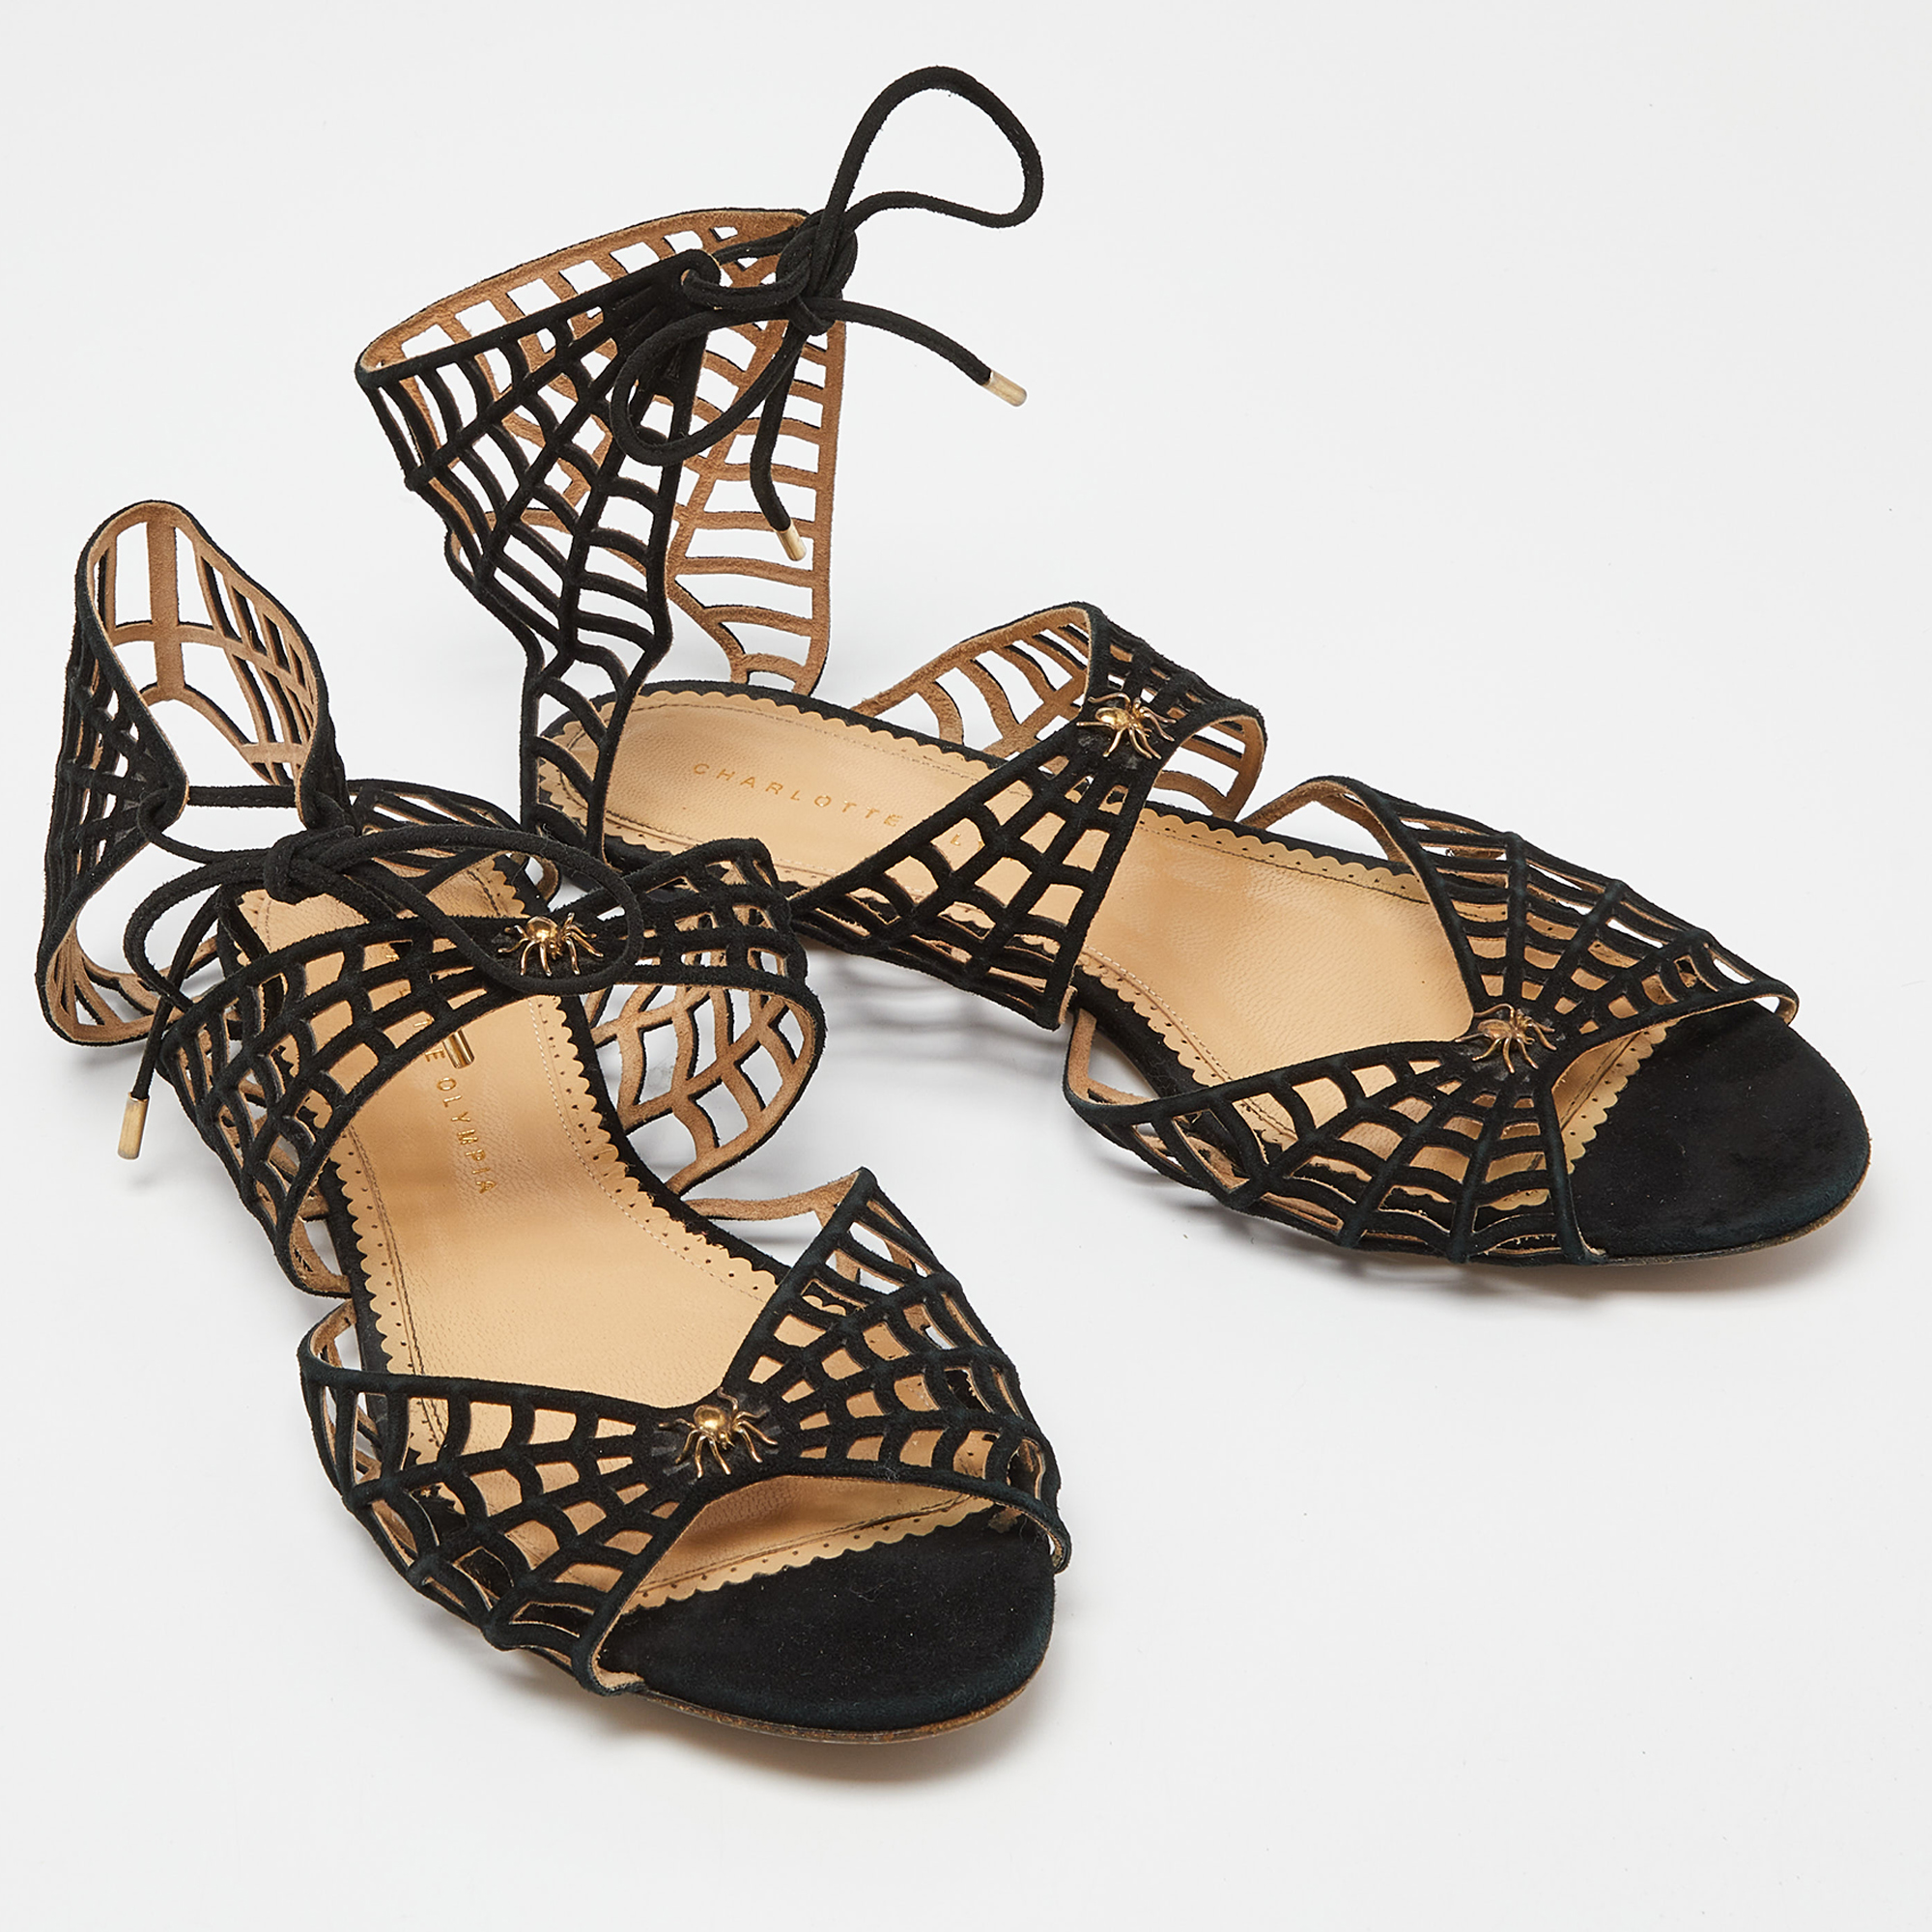 Charlotte Olympia Black Suede Miss Muffet Flat Sandals Size 41